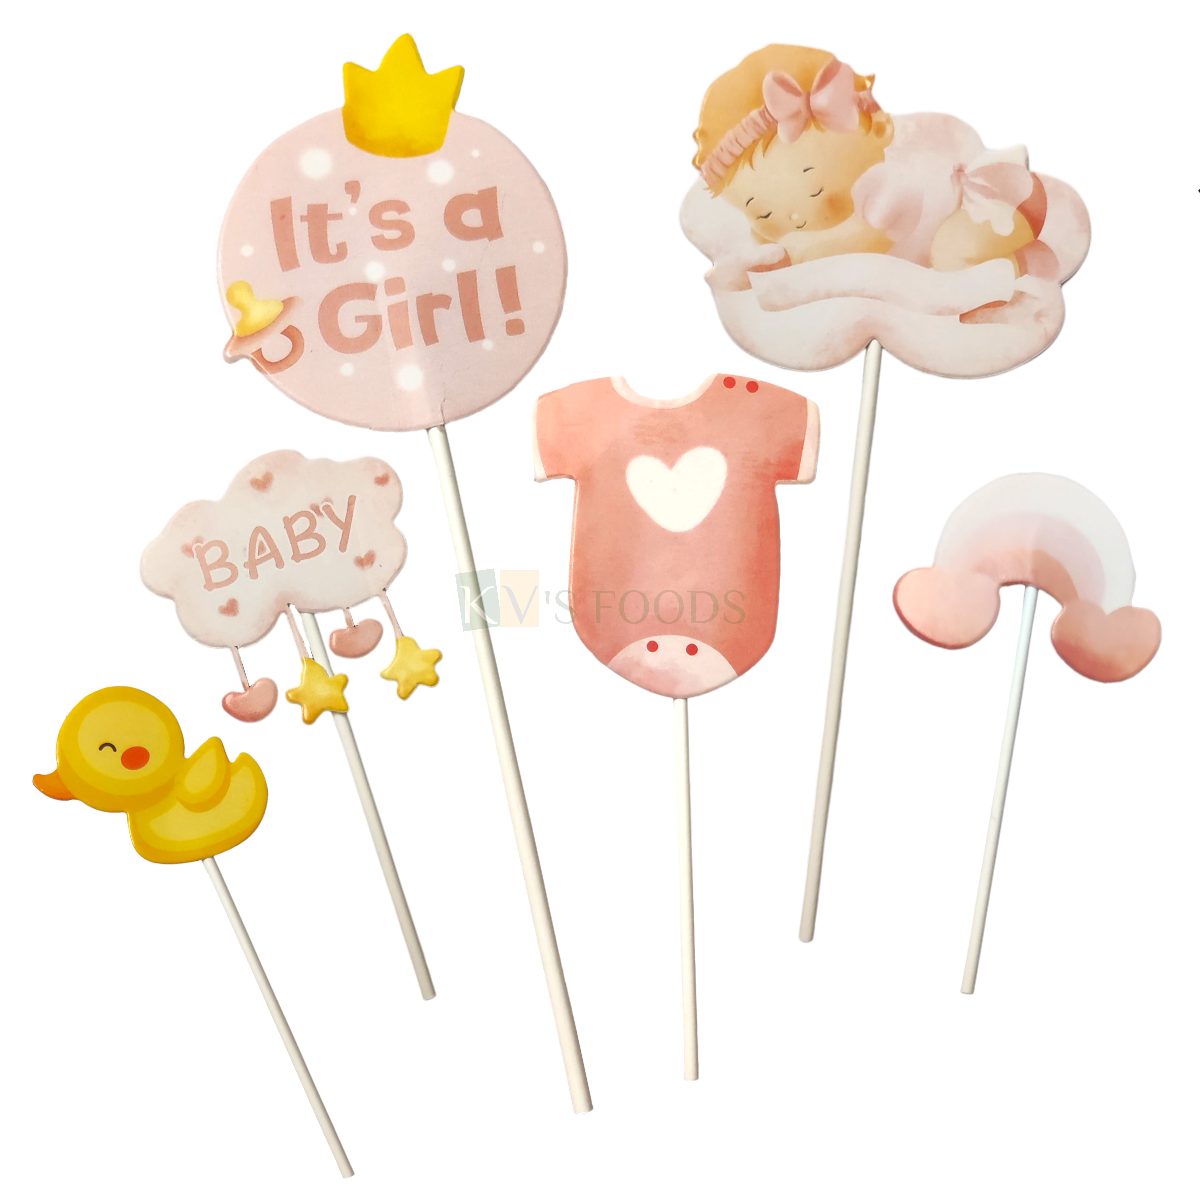 6 PC Pastel Colour Yellow and Peach Baby Shower Cake Topper New Born Girls Welcome Ceremony Party Cake Insert, Duck Cloud Crown Heart Star T-shirt Cake Decoration Item, DIY Cake Accessories and Decor